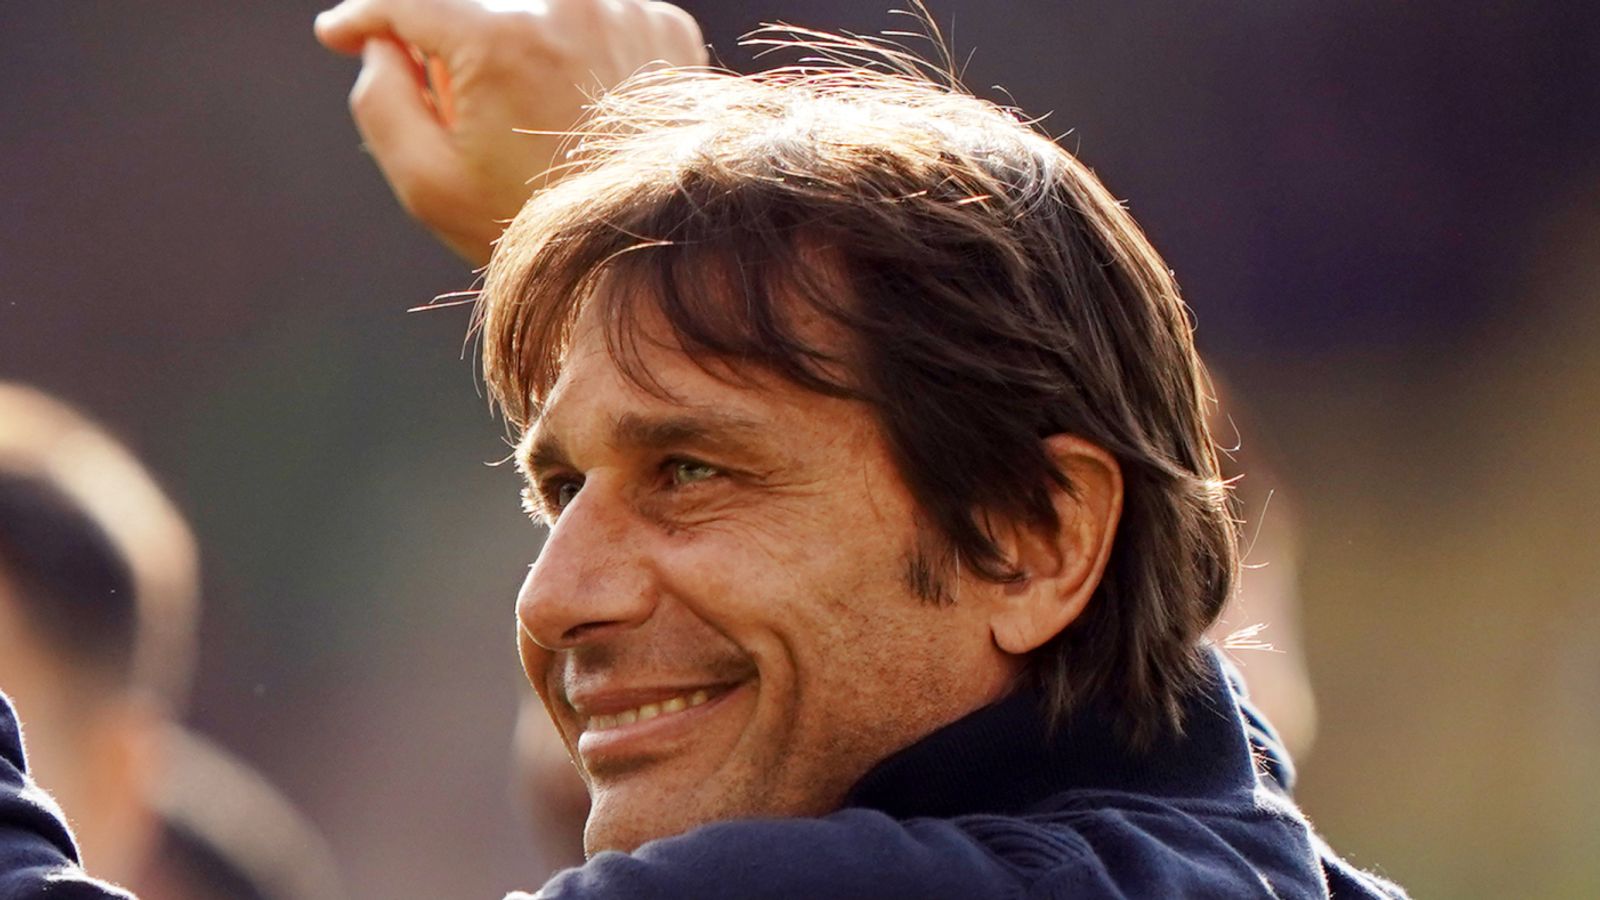 Antonio Conte expected to remain at Tottenham after talks with transfer chief Fabio Paratici